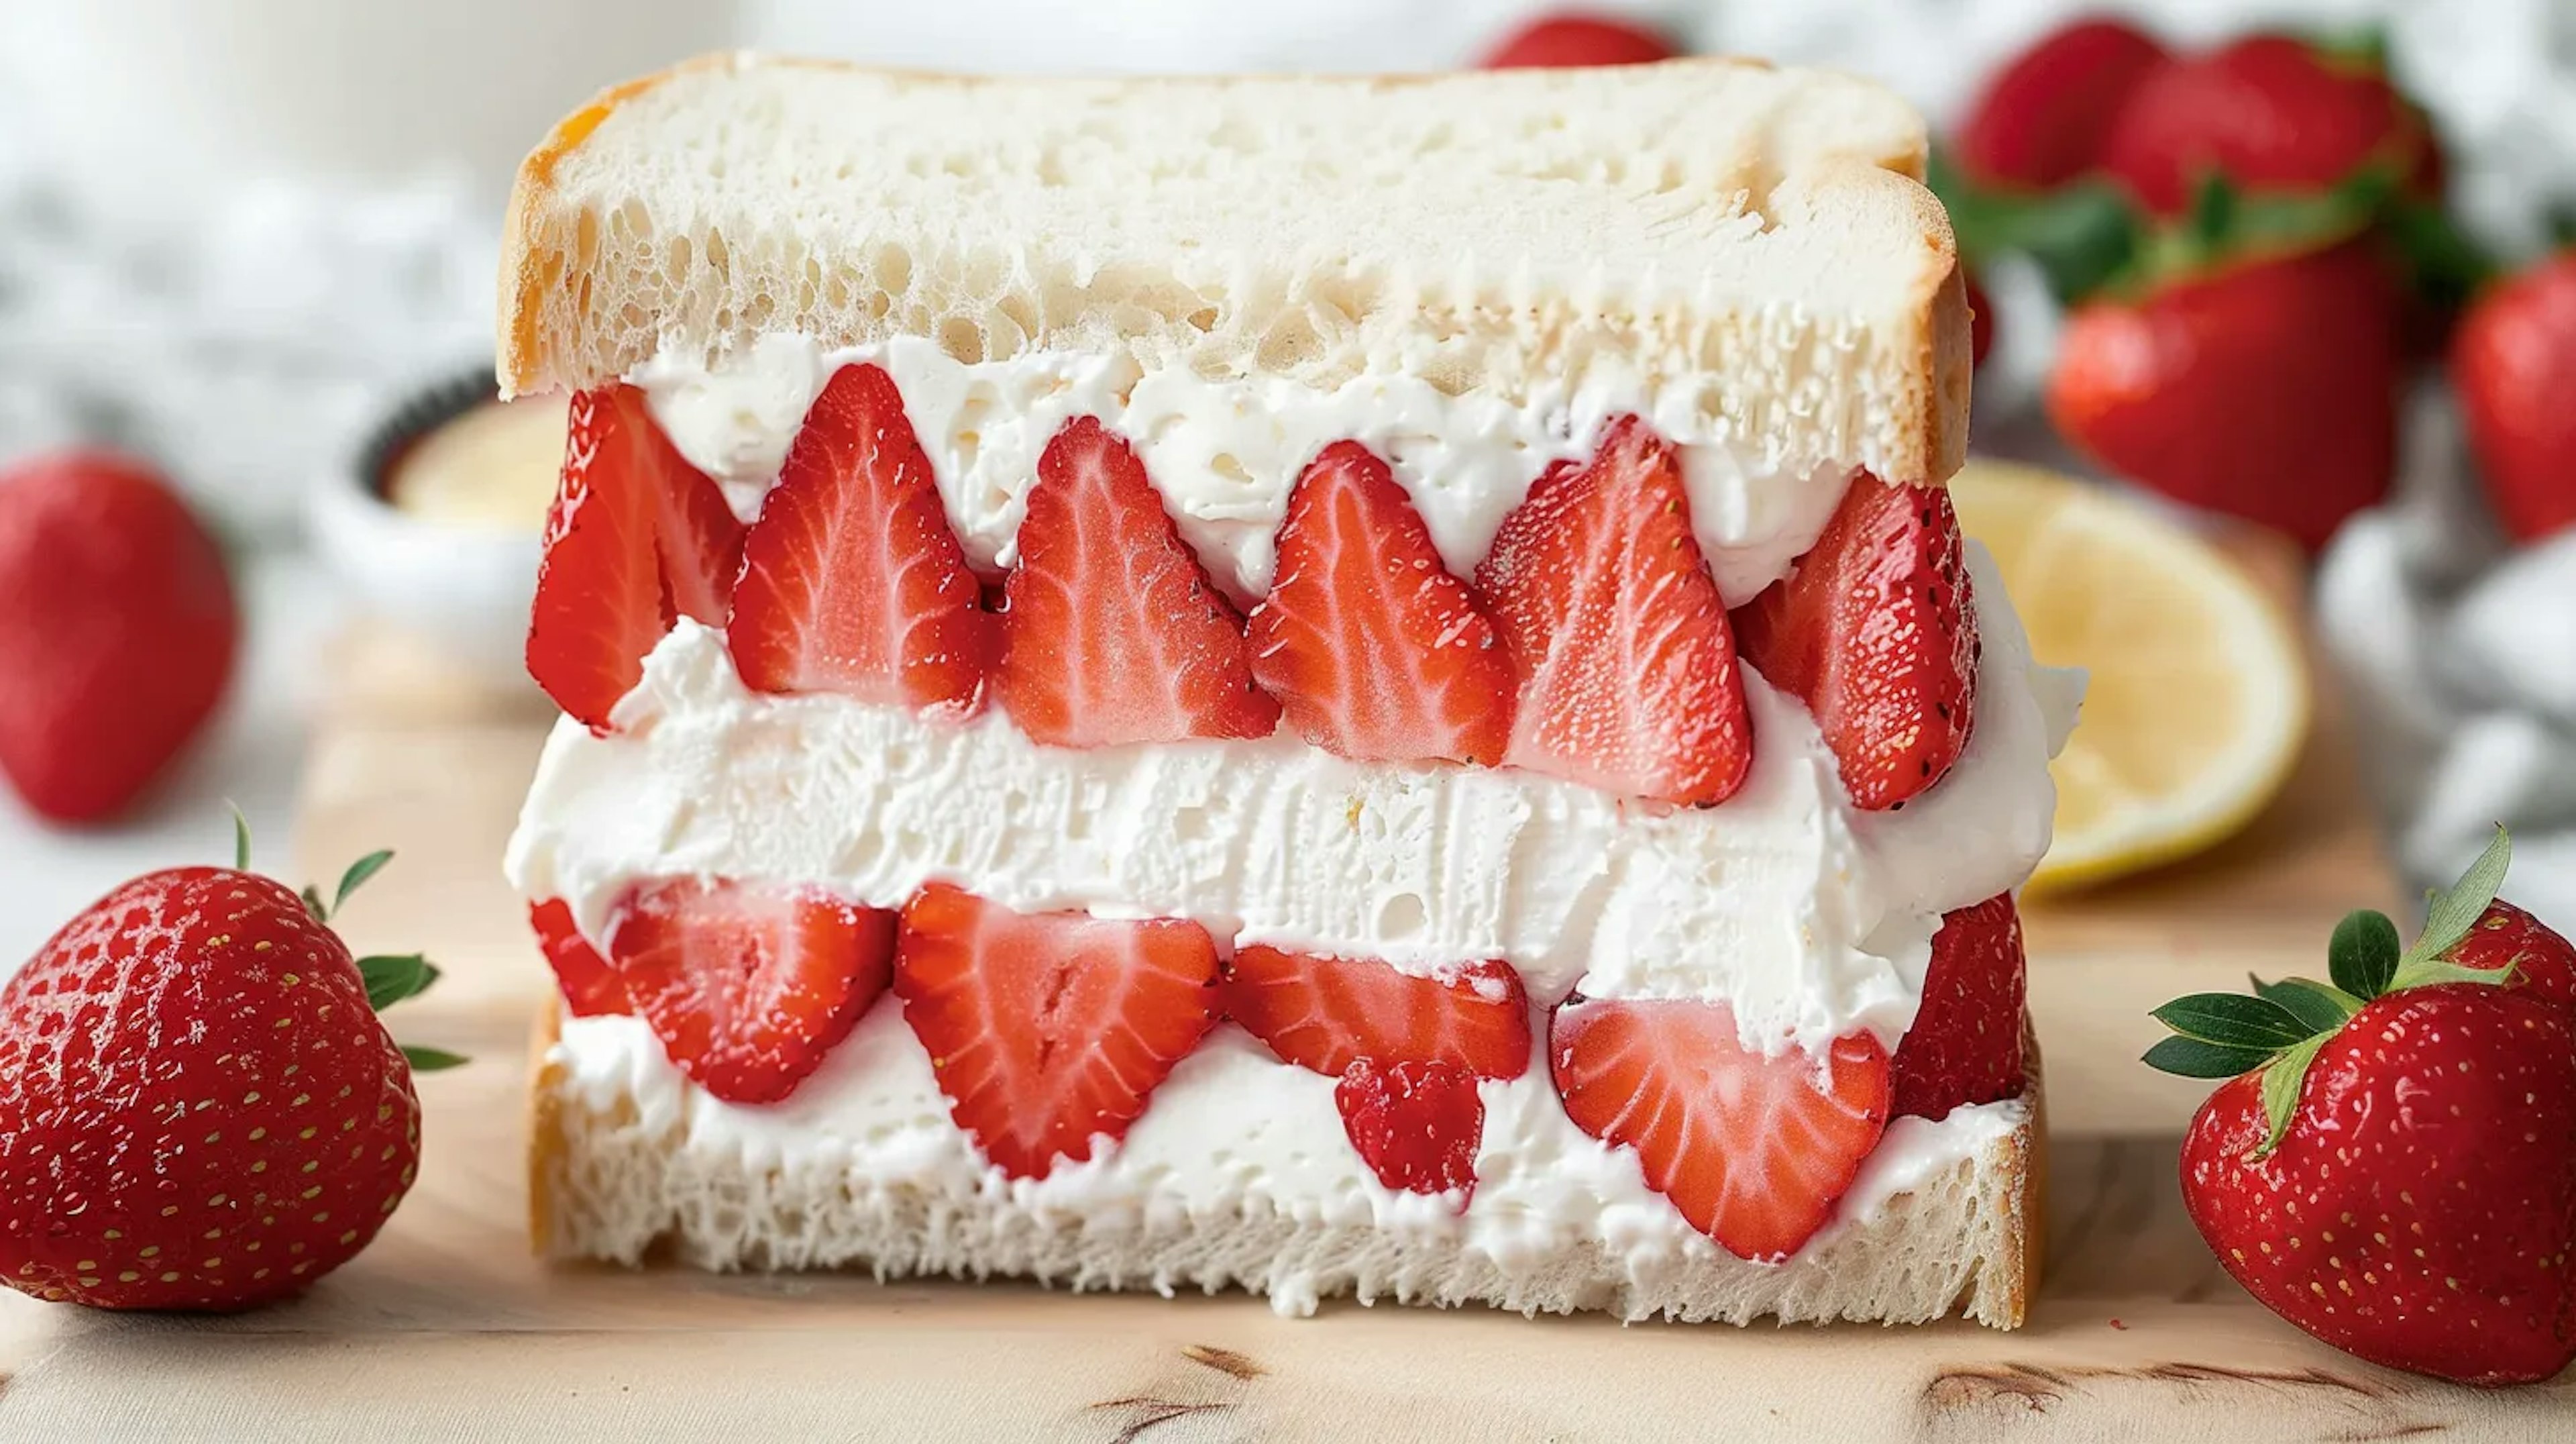 Hand holding a cut strawberry sando with fresh strawberries and cream, with a Japanese conbini background.